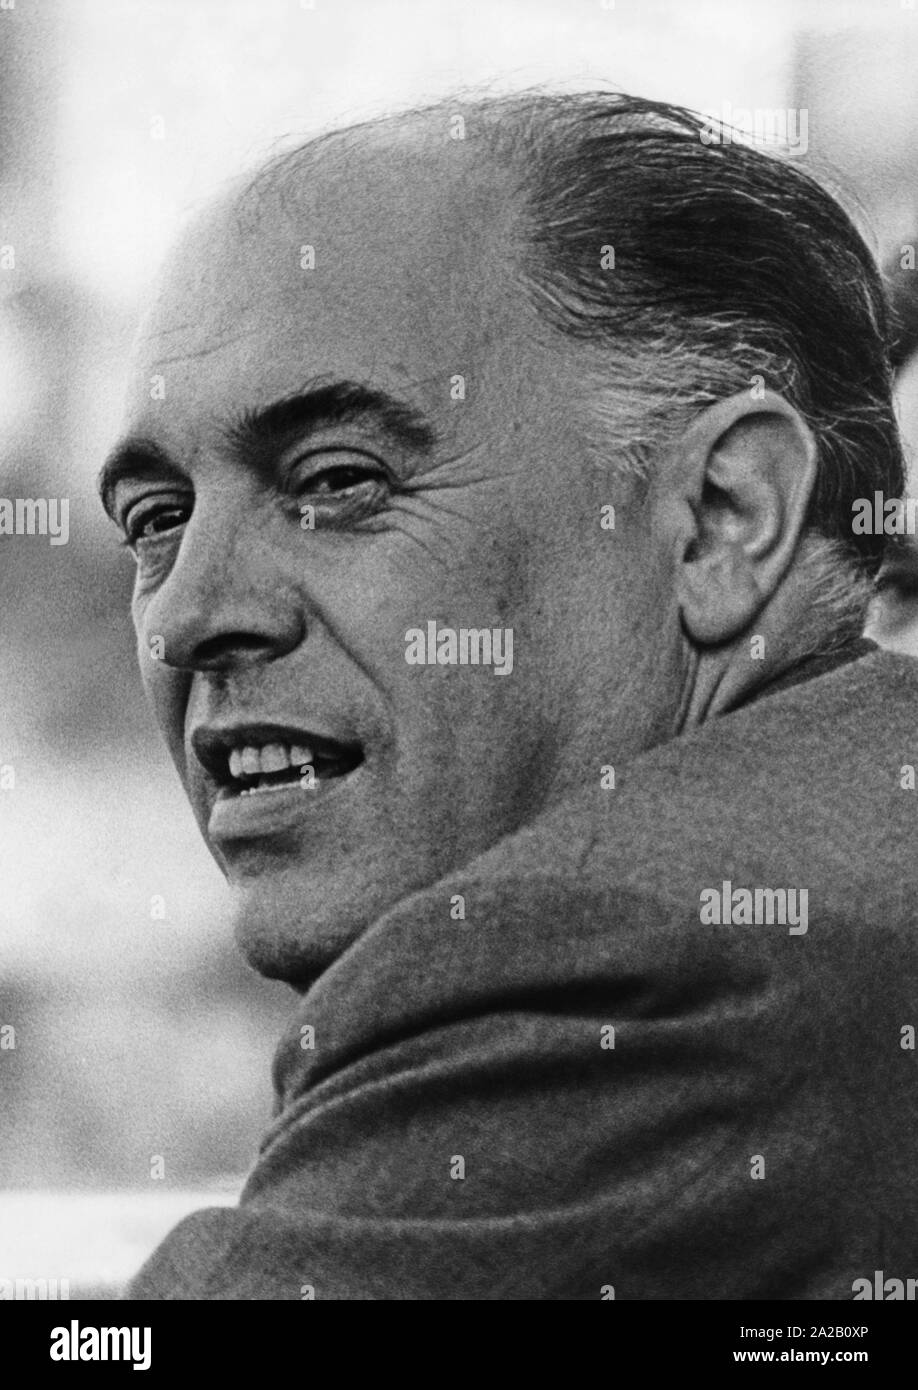 Portrait of the film producer Carlo Ponti, who, during his career worked as a producer with some of the most important directors of the 20th century. The picture is probably from the 1960s. Stock Photo